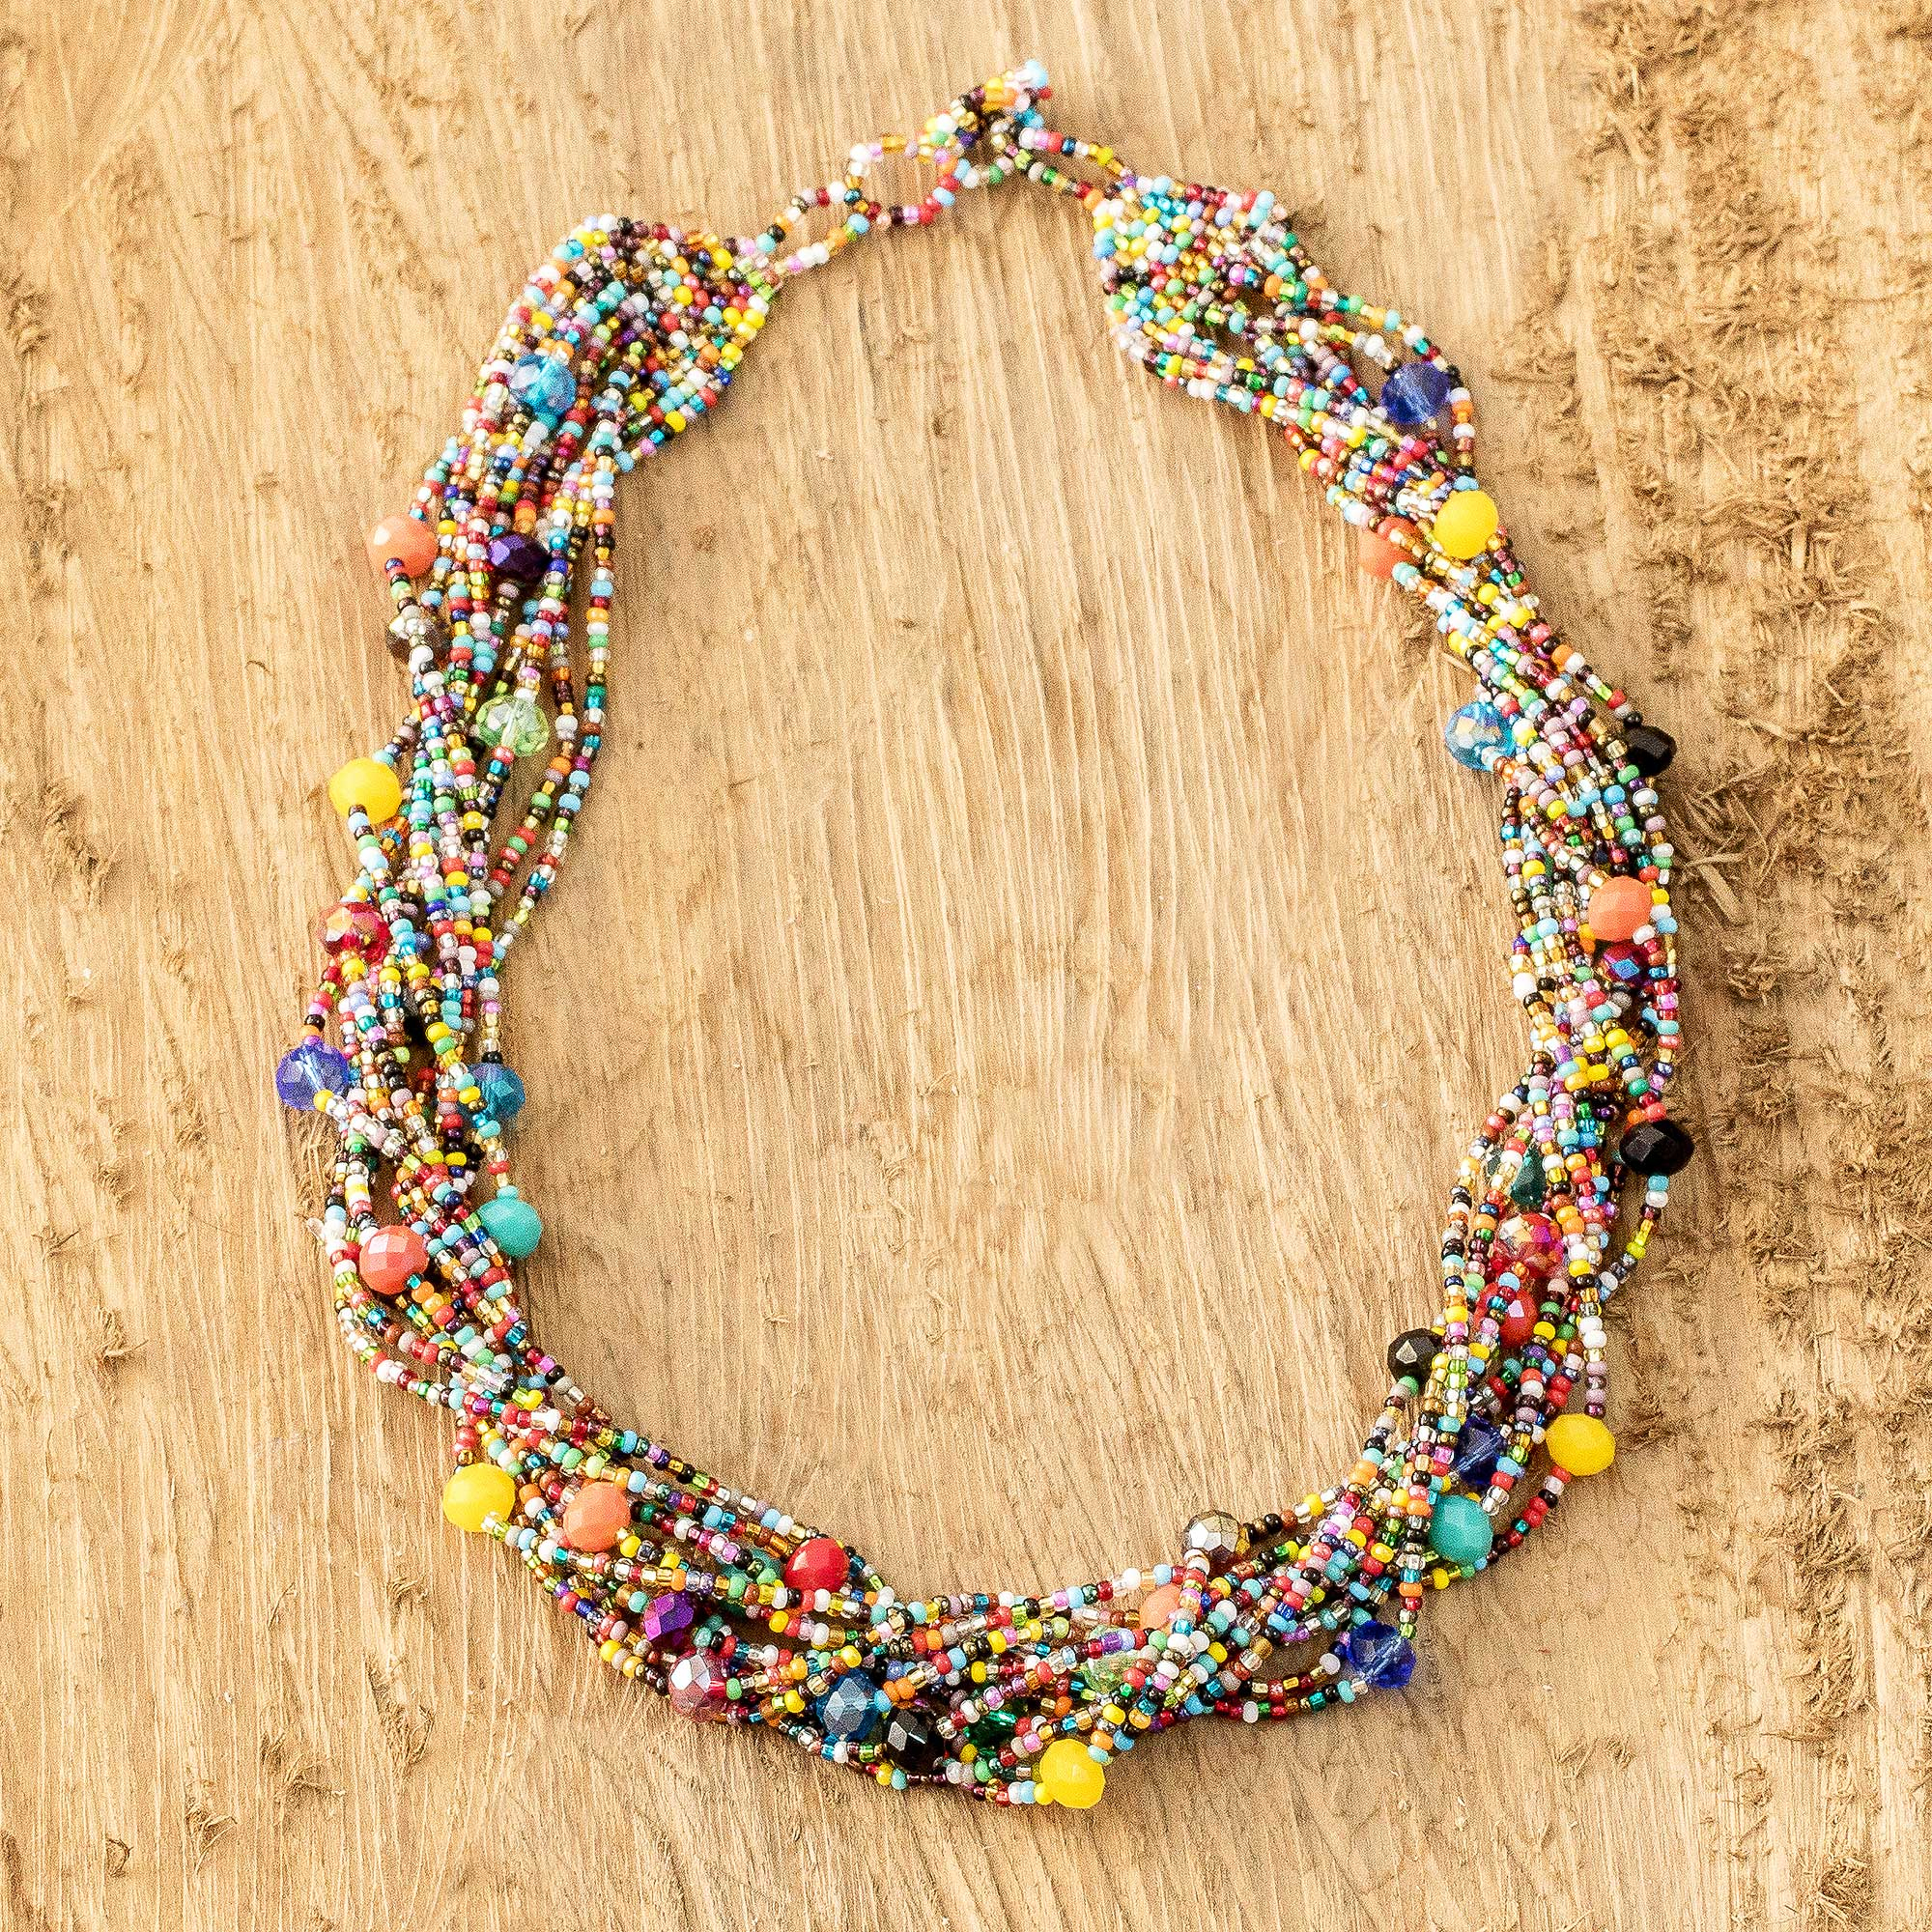 Mixed Multicolored Glass Bead Necklace